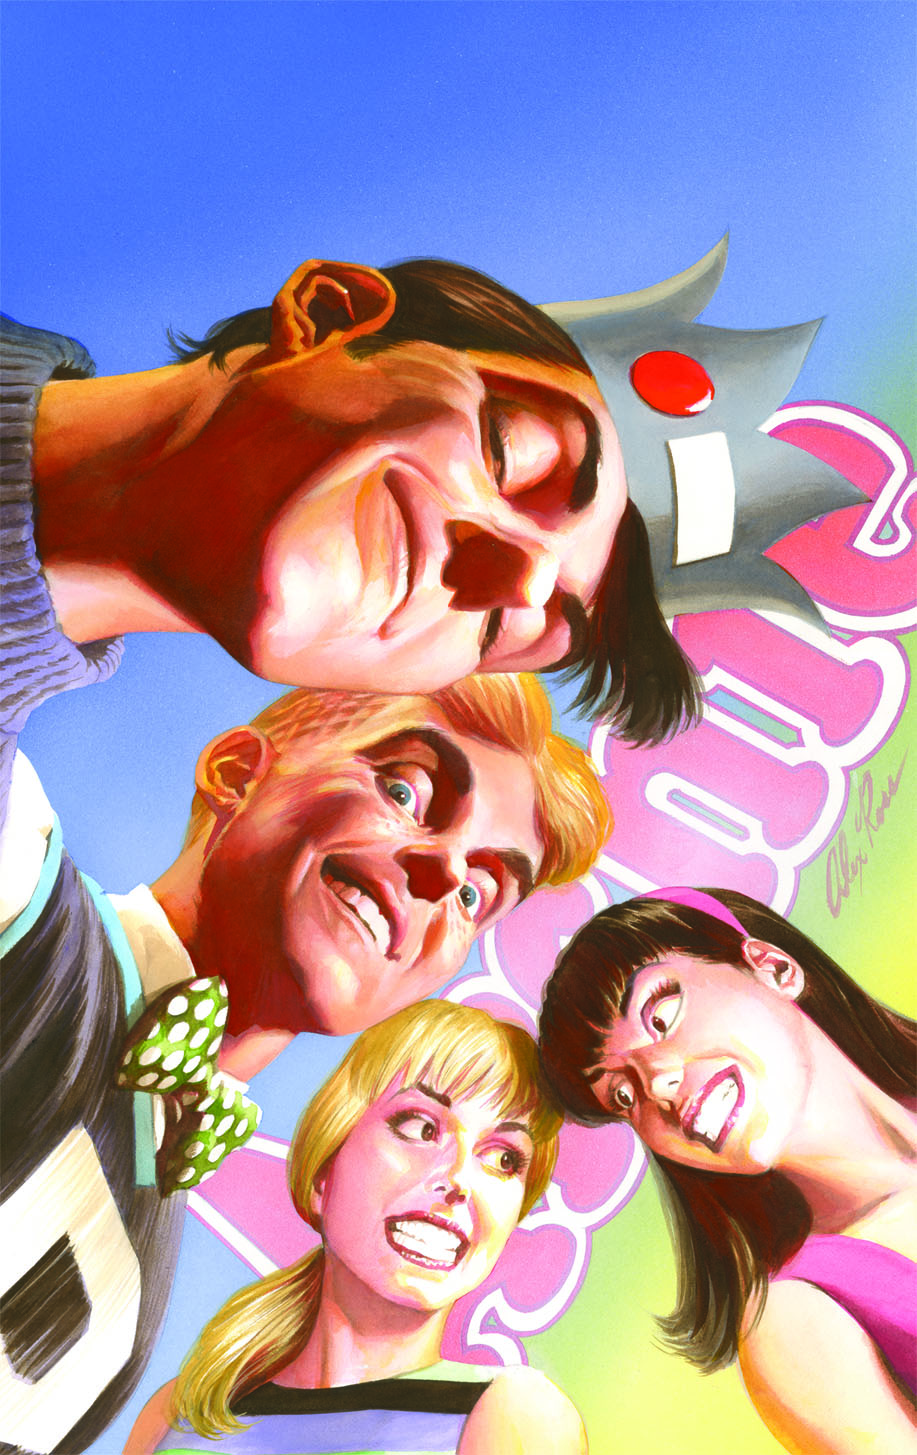 ARCHIE COMICS COME TO TELEVISION WITH 'RIVERDALE' TV SERIES - Archie Comics